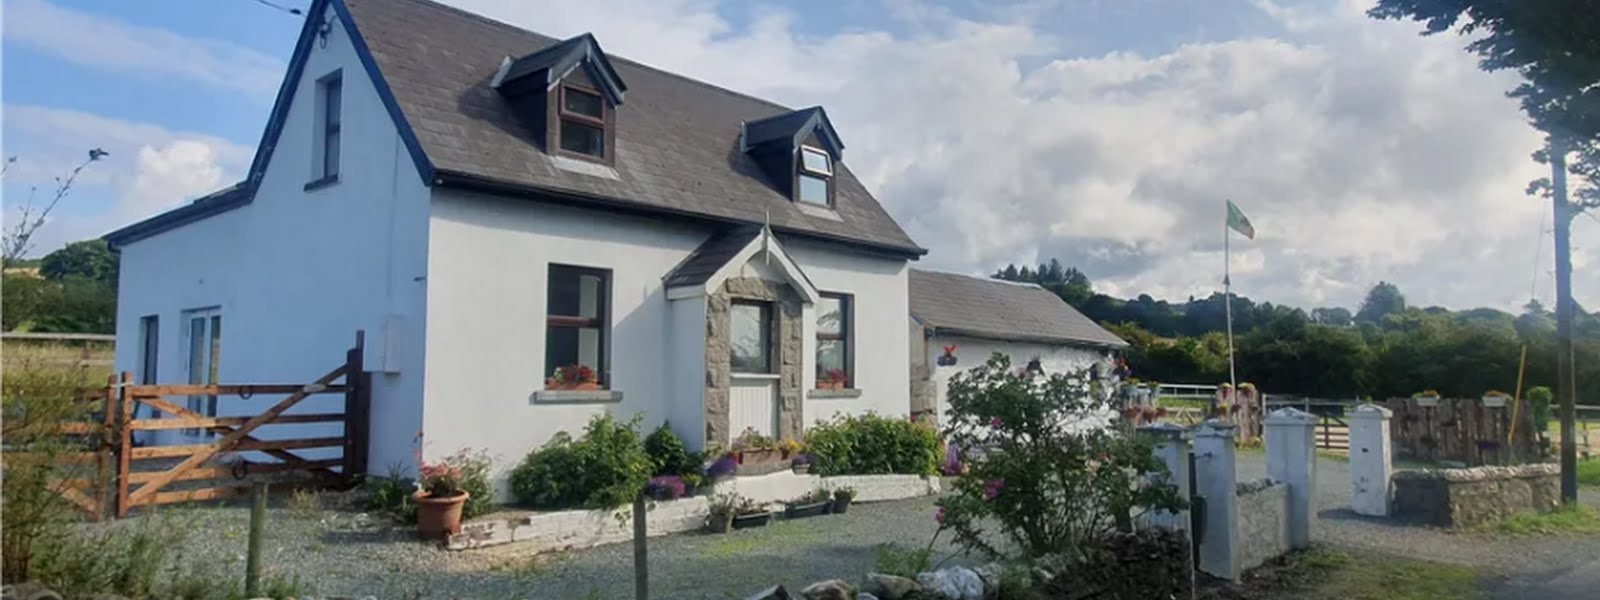 This Wicklow four-bed (complete with an equestrian smallholding) is on the market for €375,000